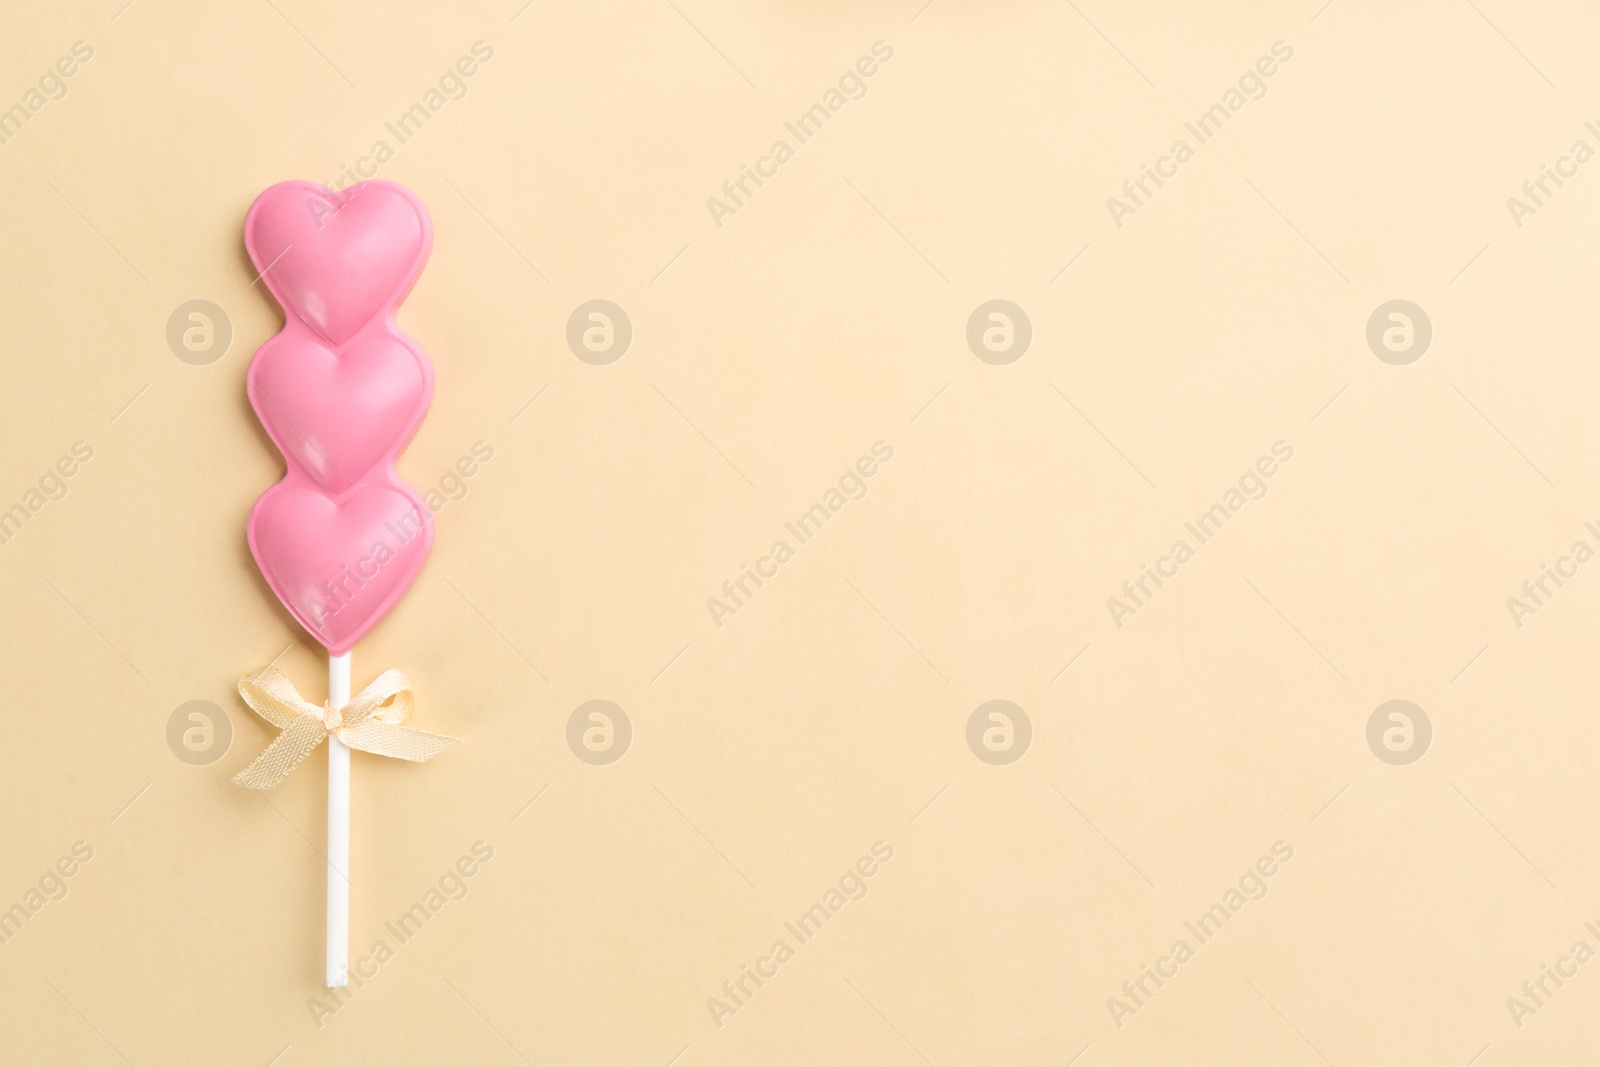 Photo of Chocolate heart shaped lollipop on beige background, top view. Space for text